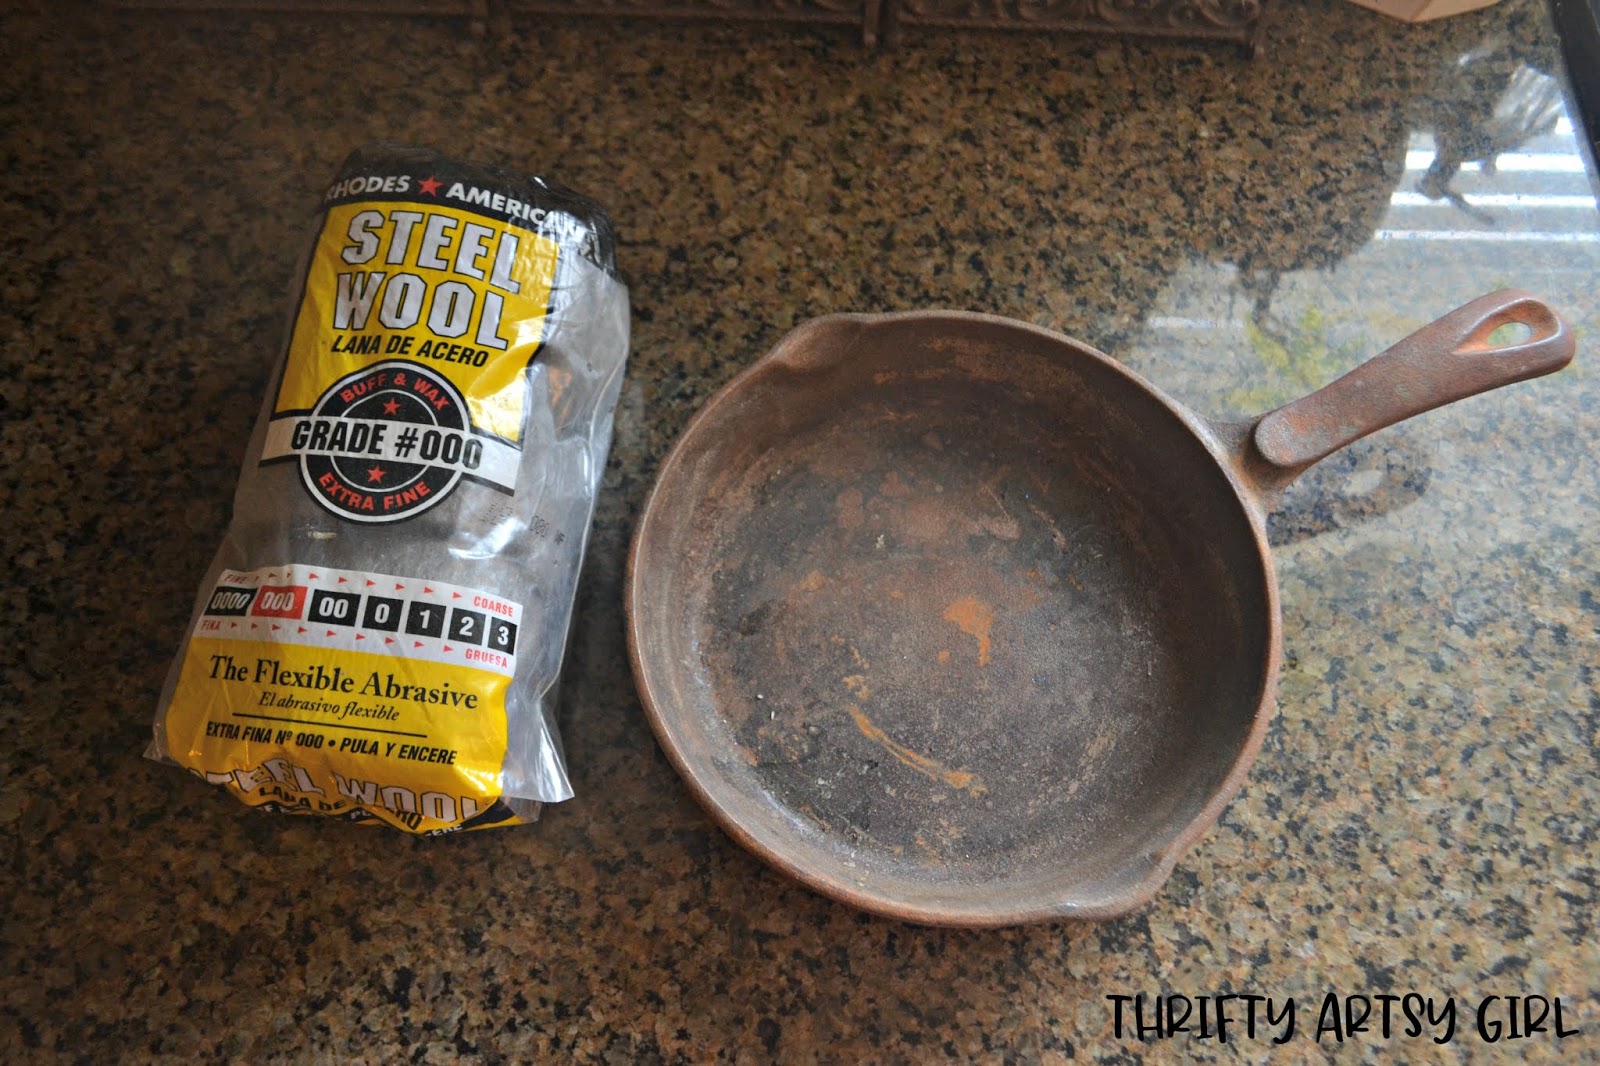 Thrifty Artsy Girl: How to Clean and Season a Rusty Cast Iron Skillet